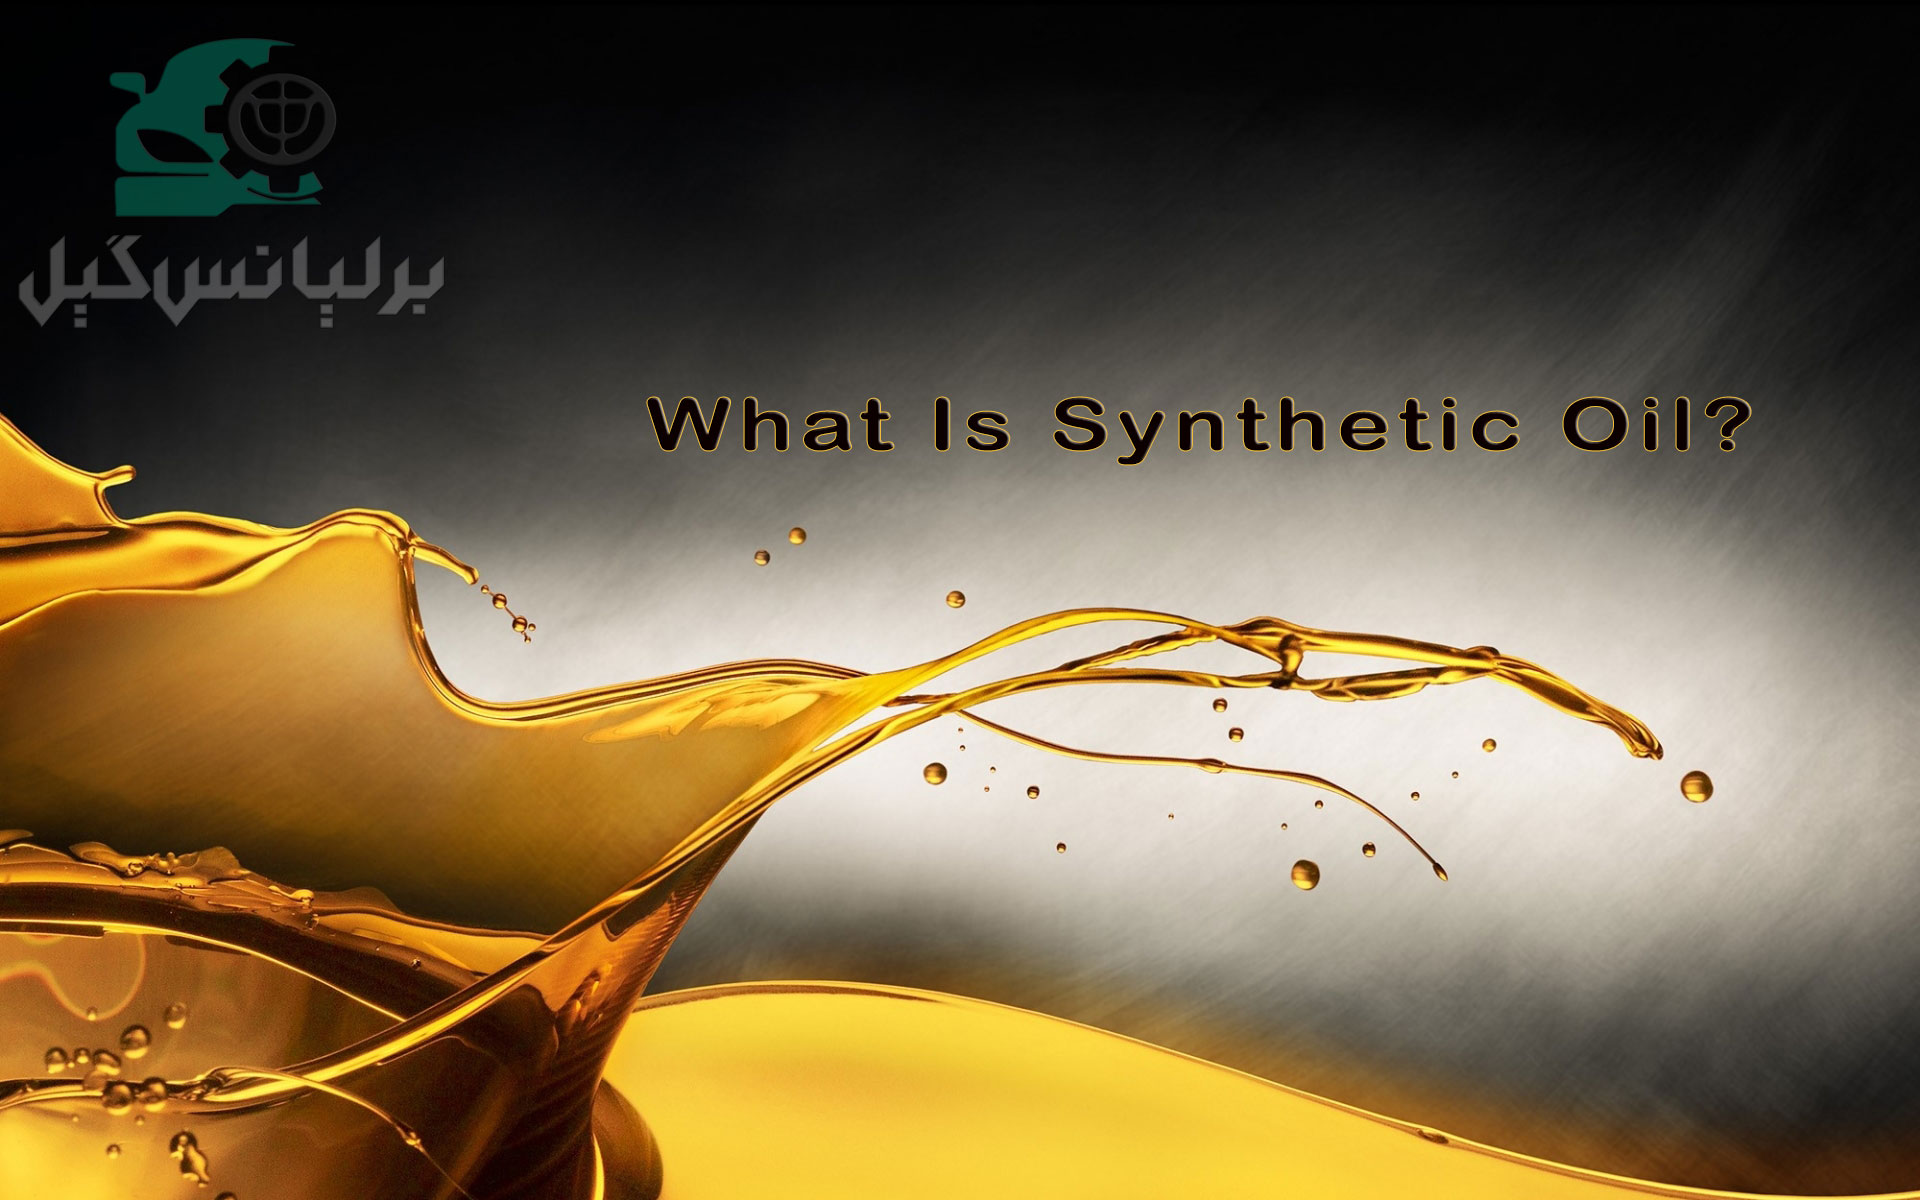 What Is Synthetic Oil?